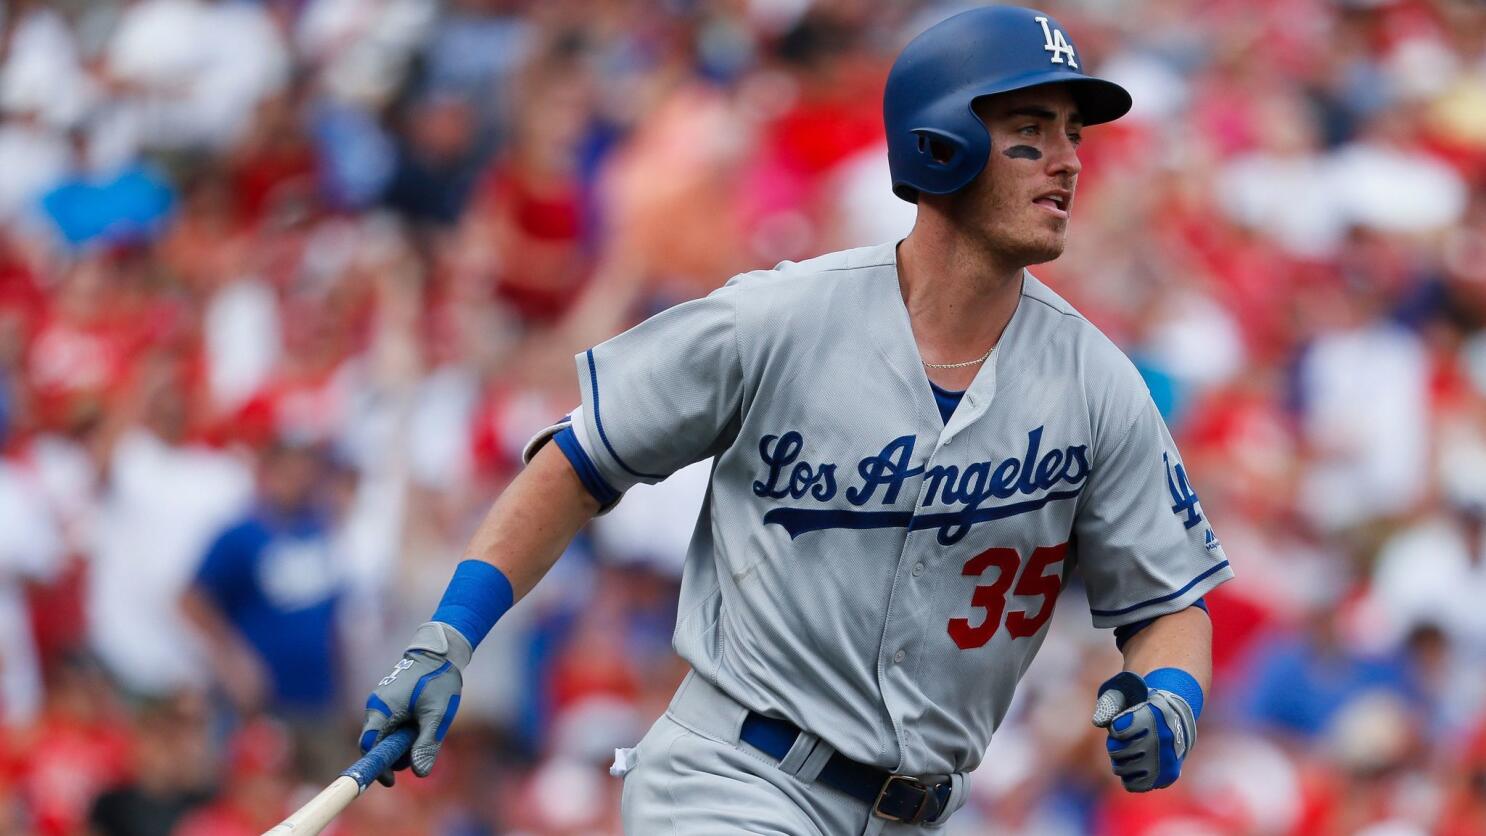 Could Cody Bellinger be next Dodgers rookie in Home Run Derby